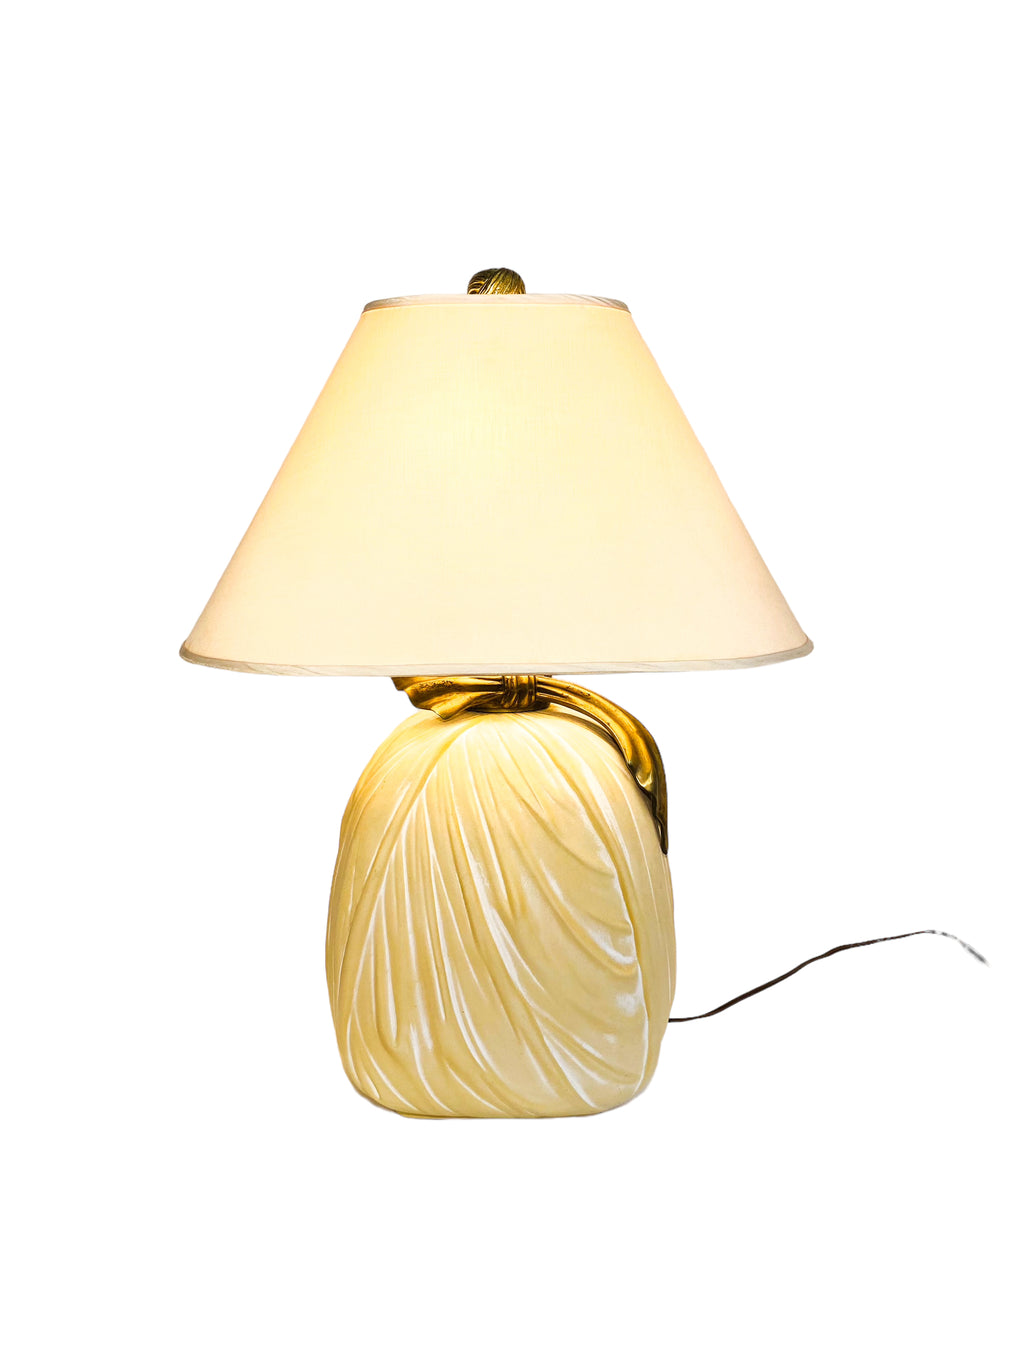 1983 Chapman Draped-Fabric Table Lamp, Local Pickup Only**